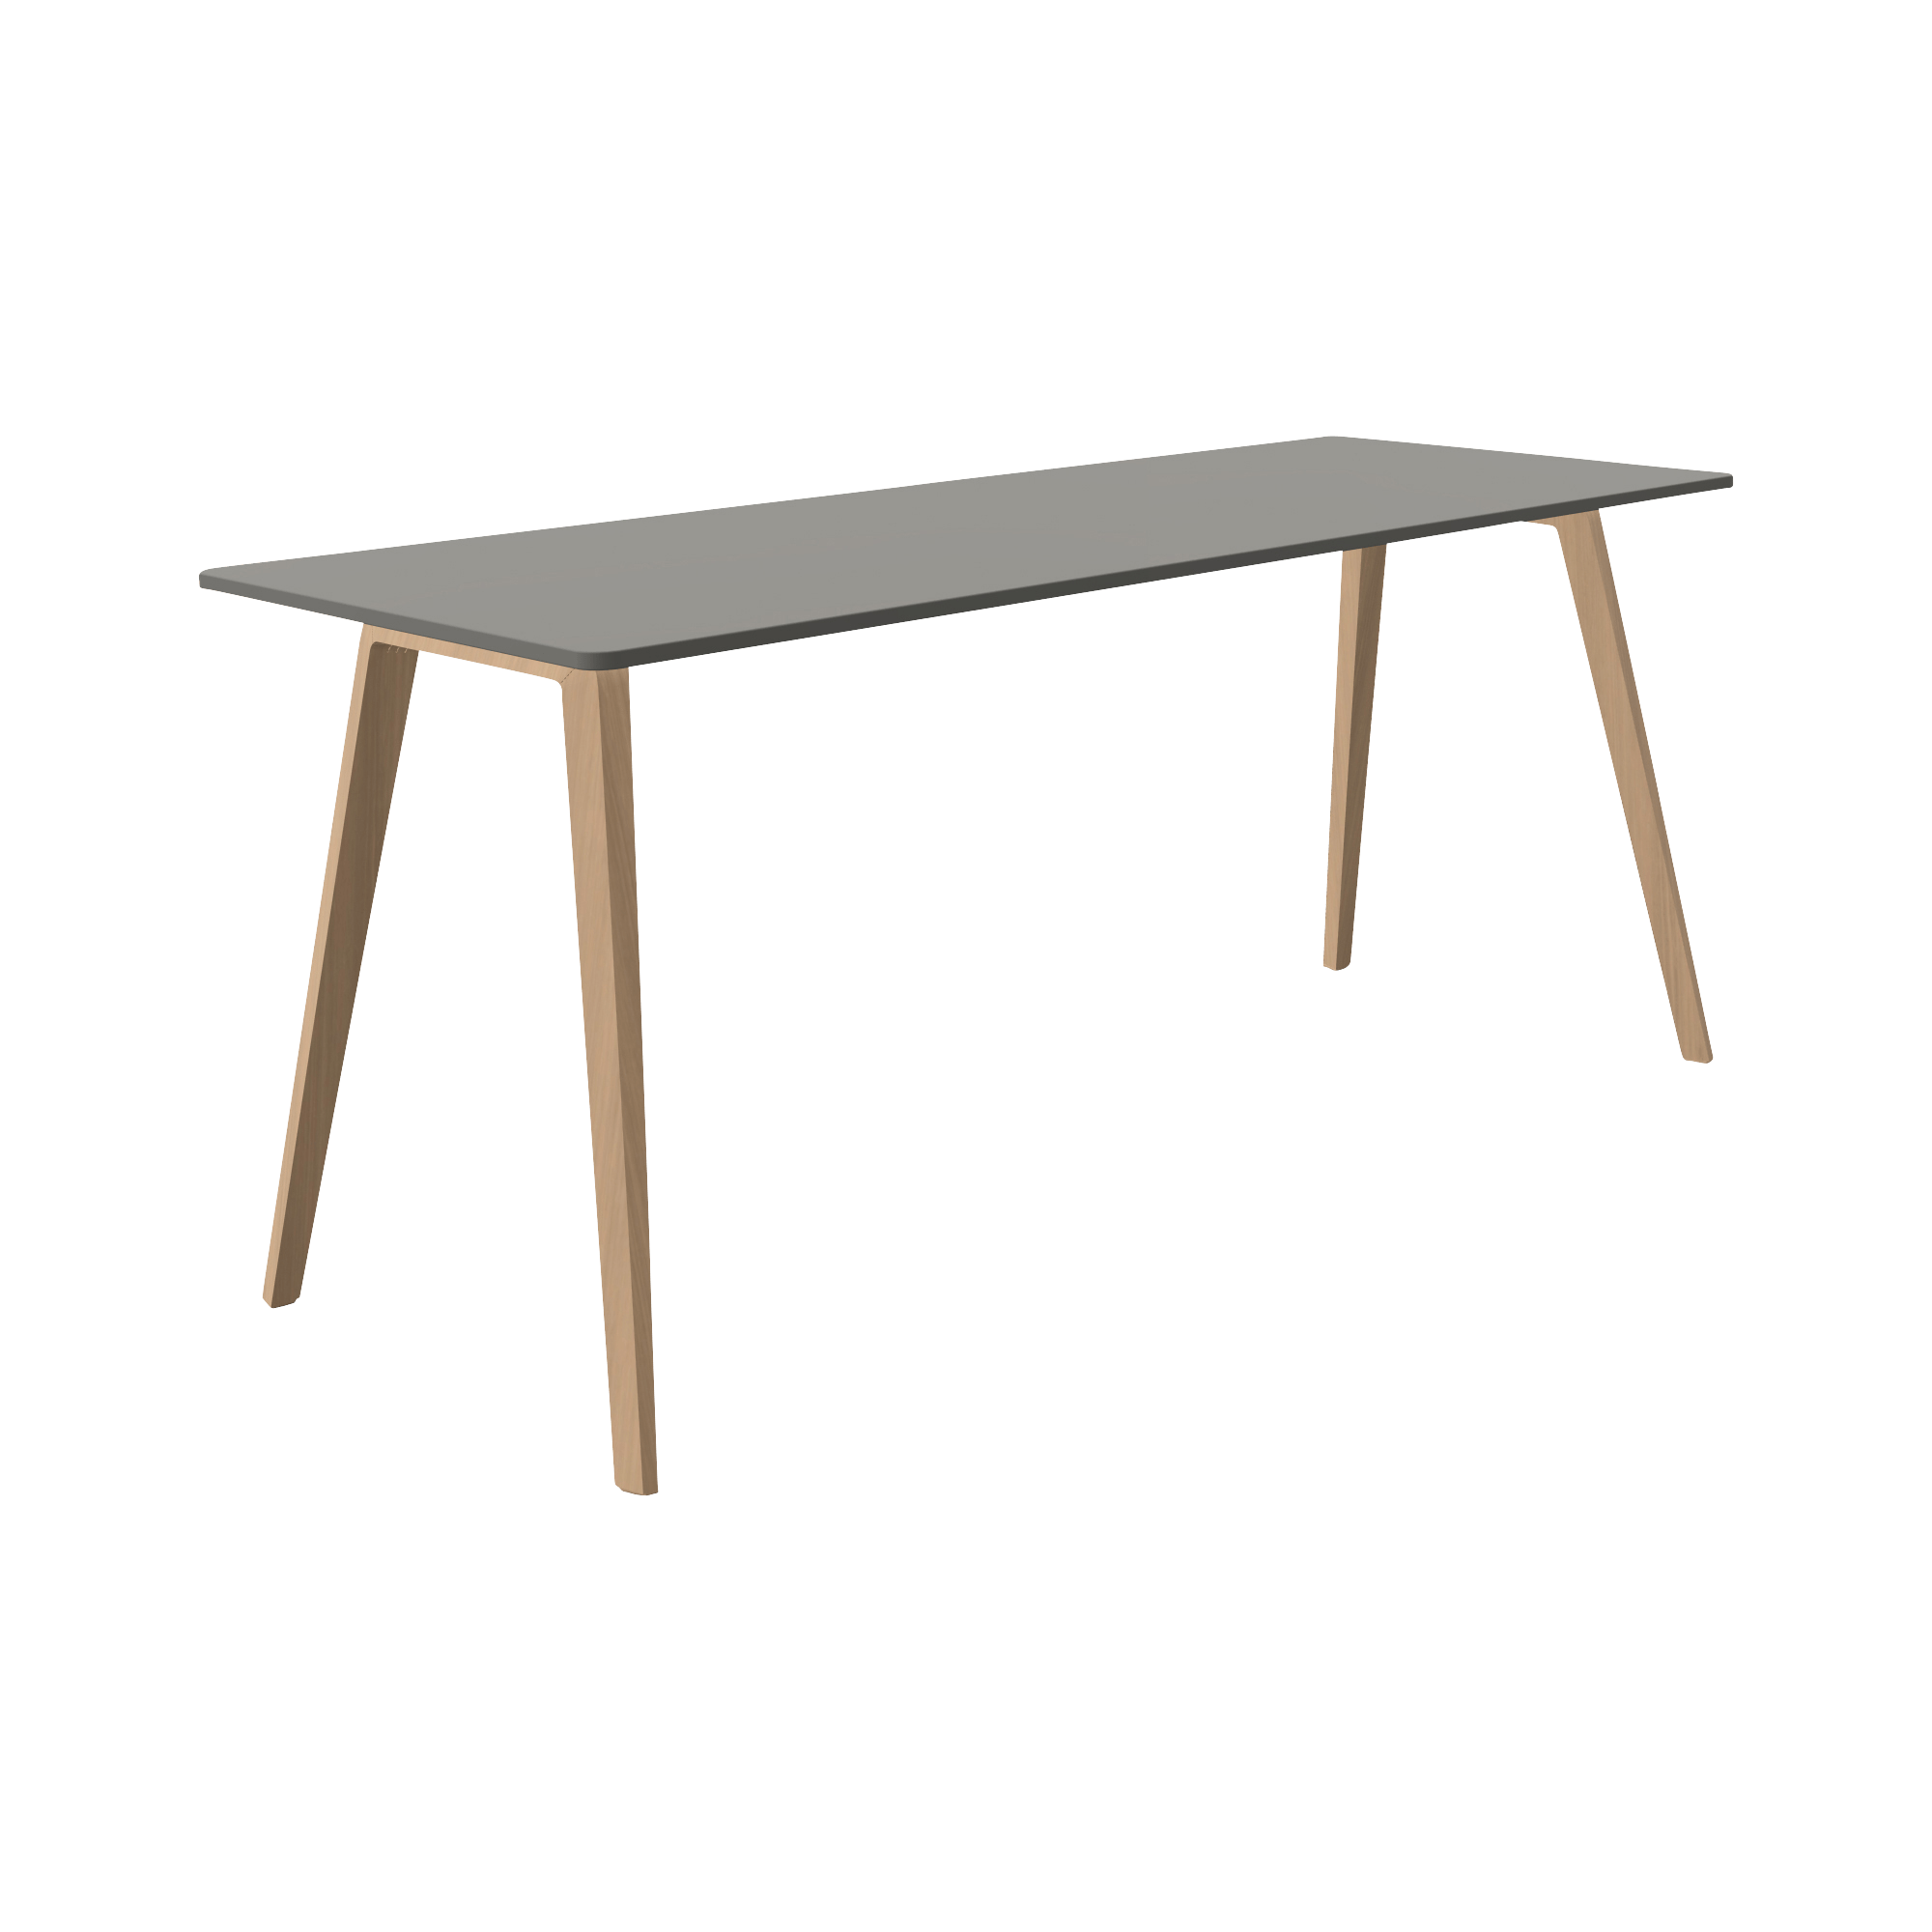 A grey table with wooden legs